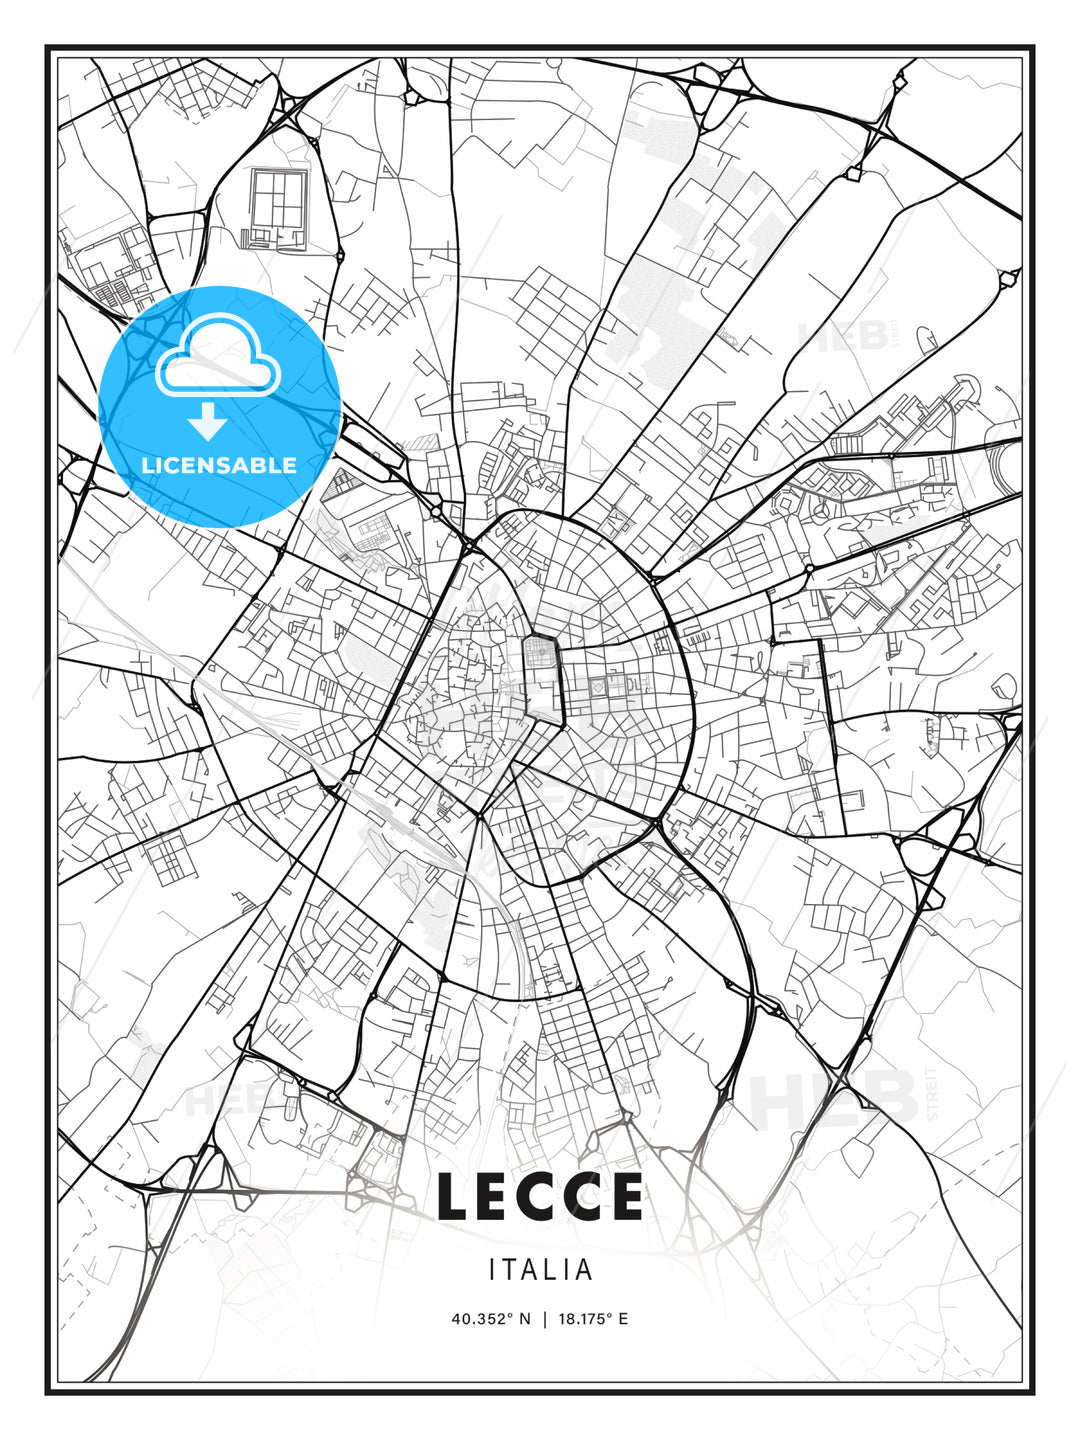 Lecce, Italy, Modern Print Template in Various Formats - HEBSTREITS Sketches